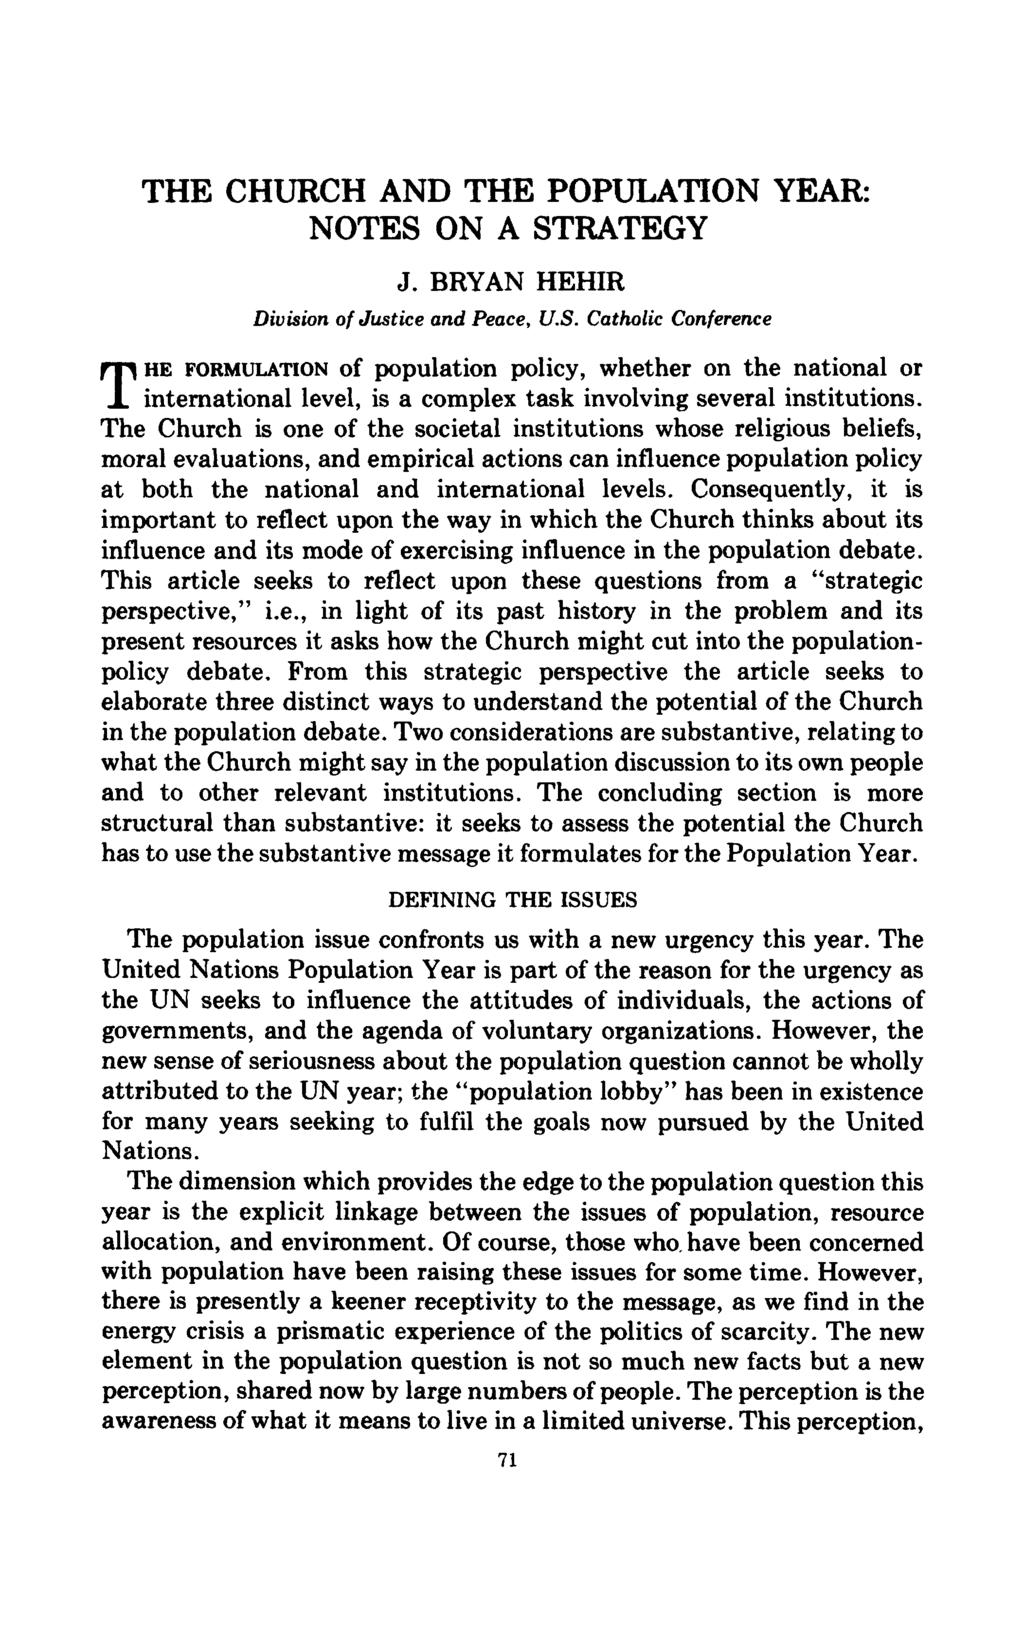 THE CHURCH AND THE POPULATION YEAR: NOTES ON A STRATEGY J. BRYAN HEHIR Division of Justice and Peace, U.S. Catholic Conference THE FORMULATION of population policy, whether on the national or international level, is a complex task involving several institutions.